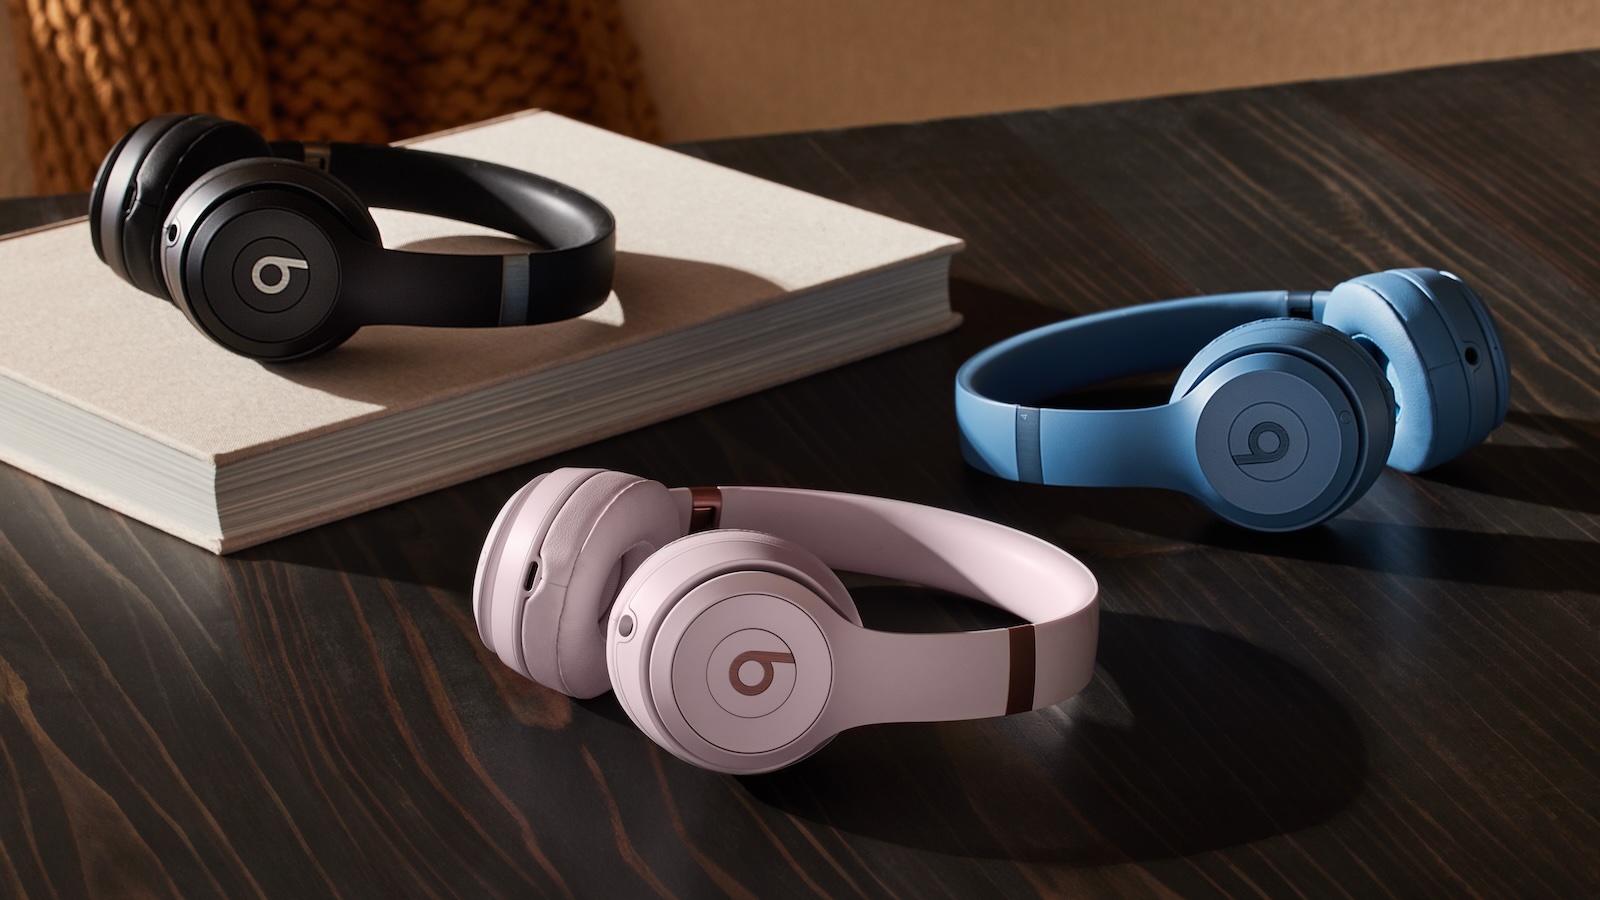 Beats Solo 4 Headphones Debut With Improved Acoustics, Longer Battery Life, and More